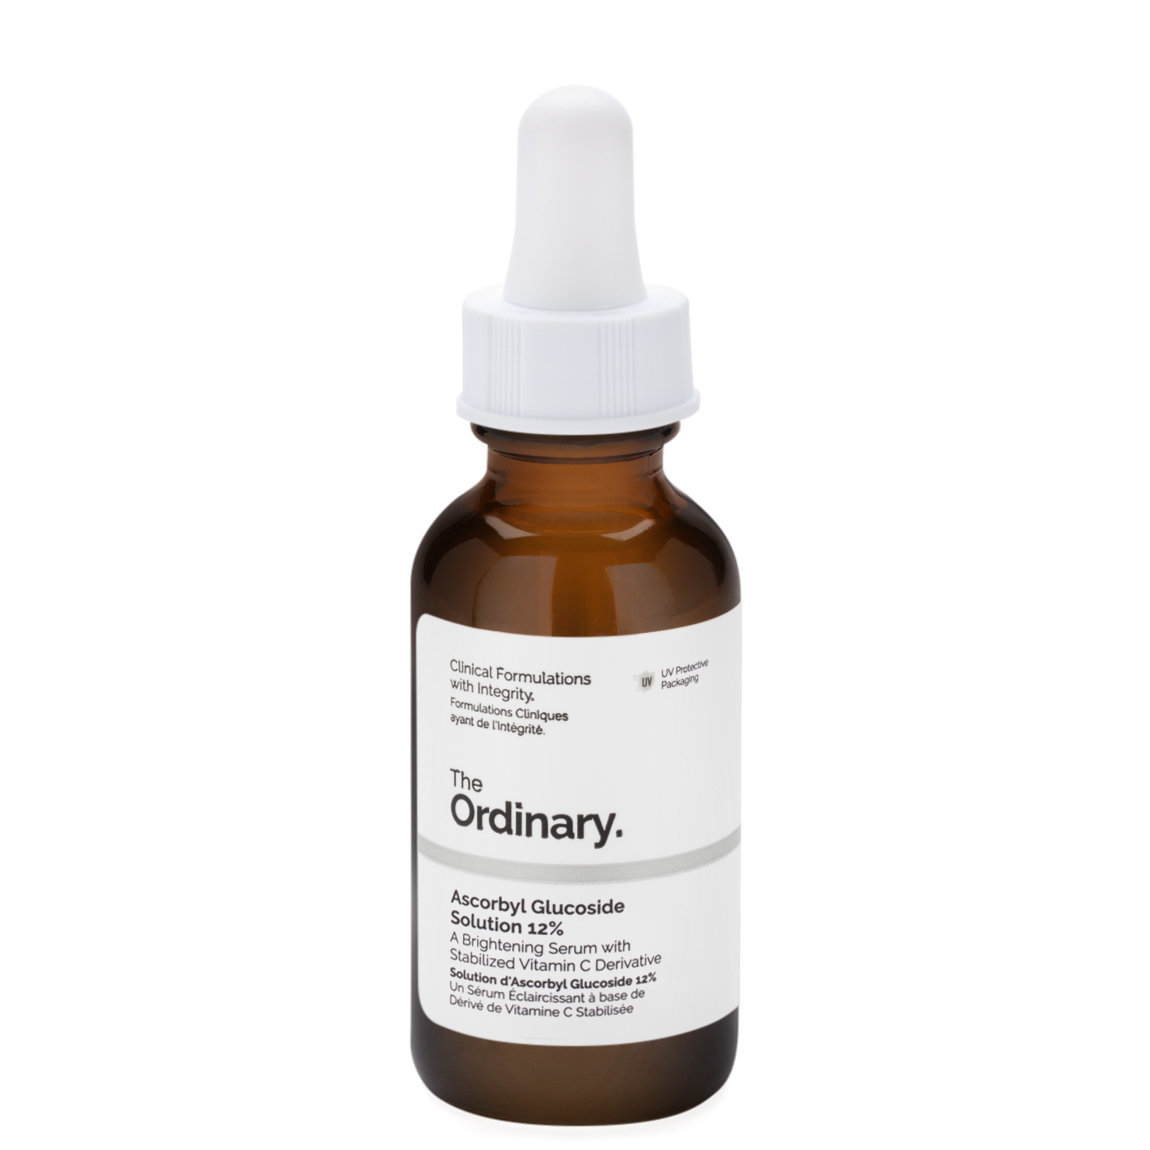 The Ordinary. Ascorbyl Glucoside Solution 12% alternative view 1 - product swatch.